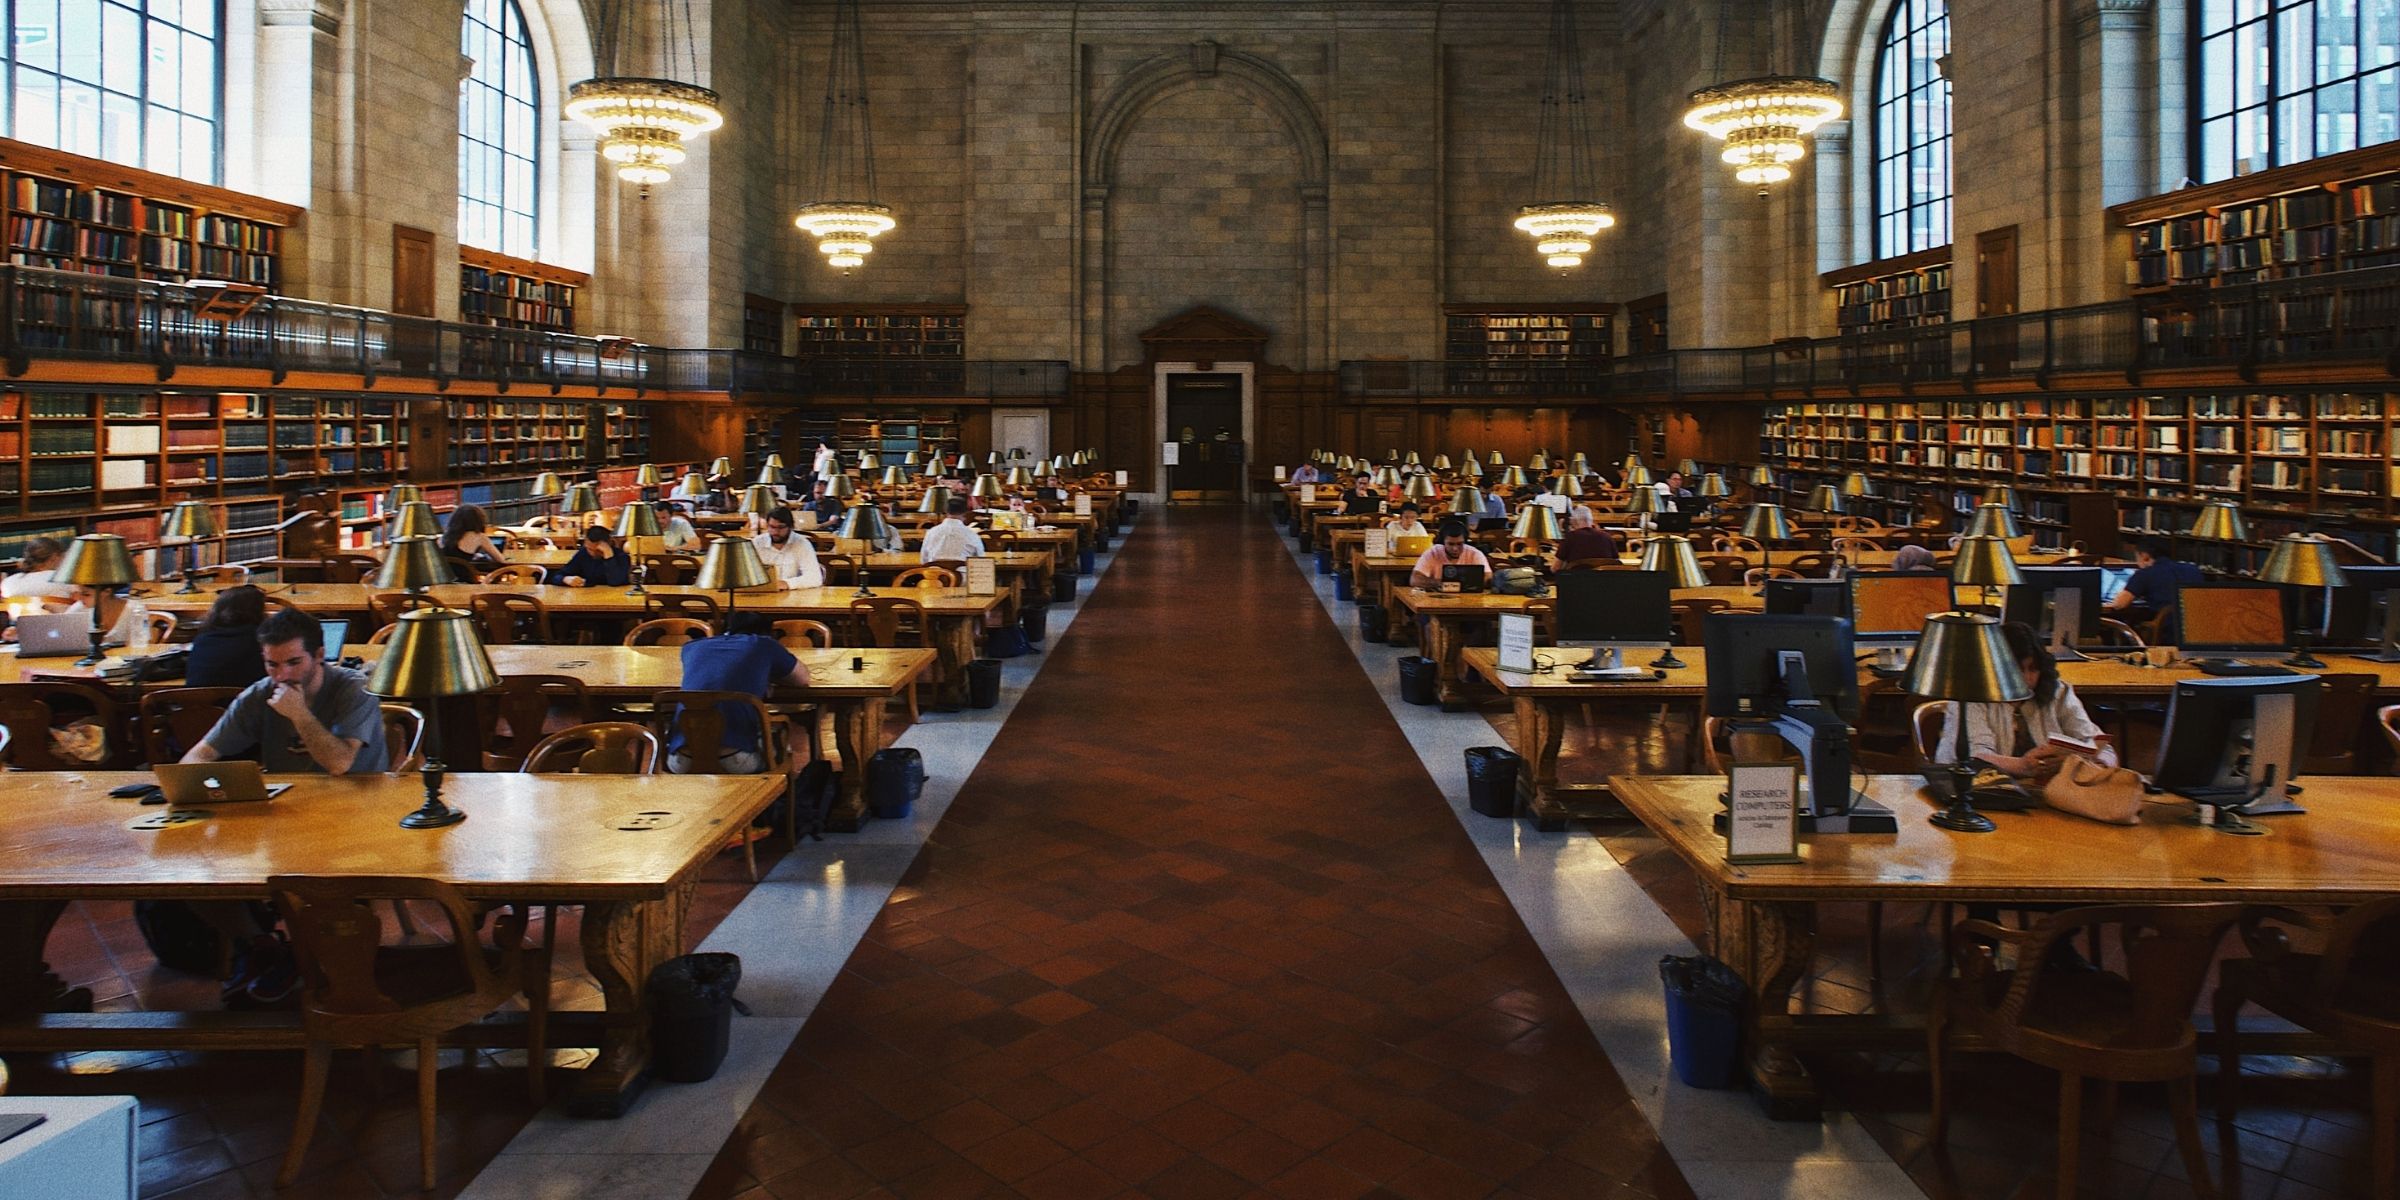 Dozens of students sitting at tables in a large library